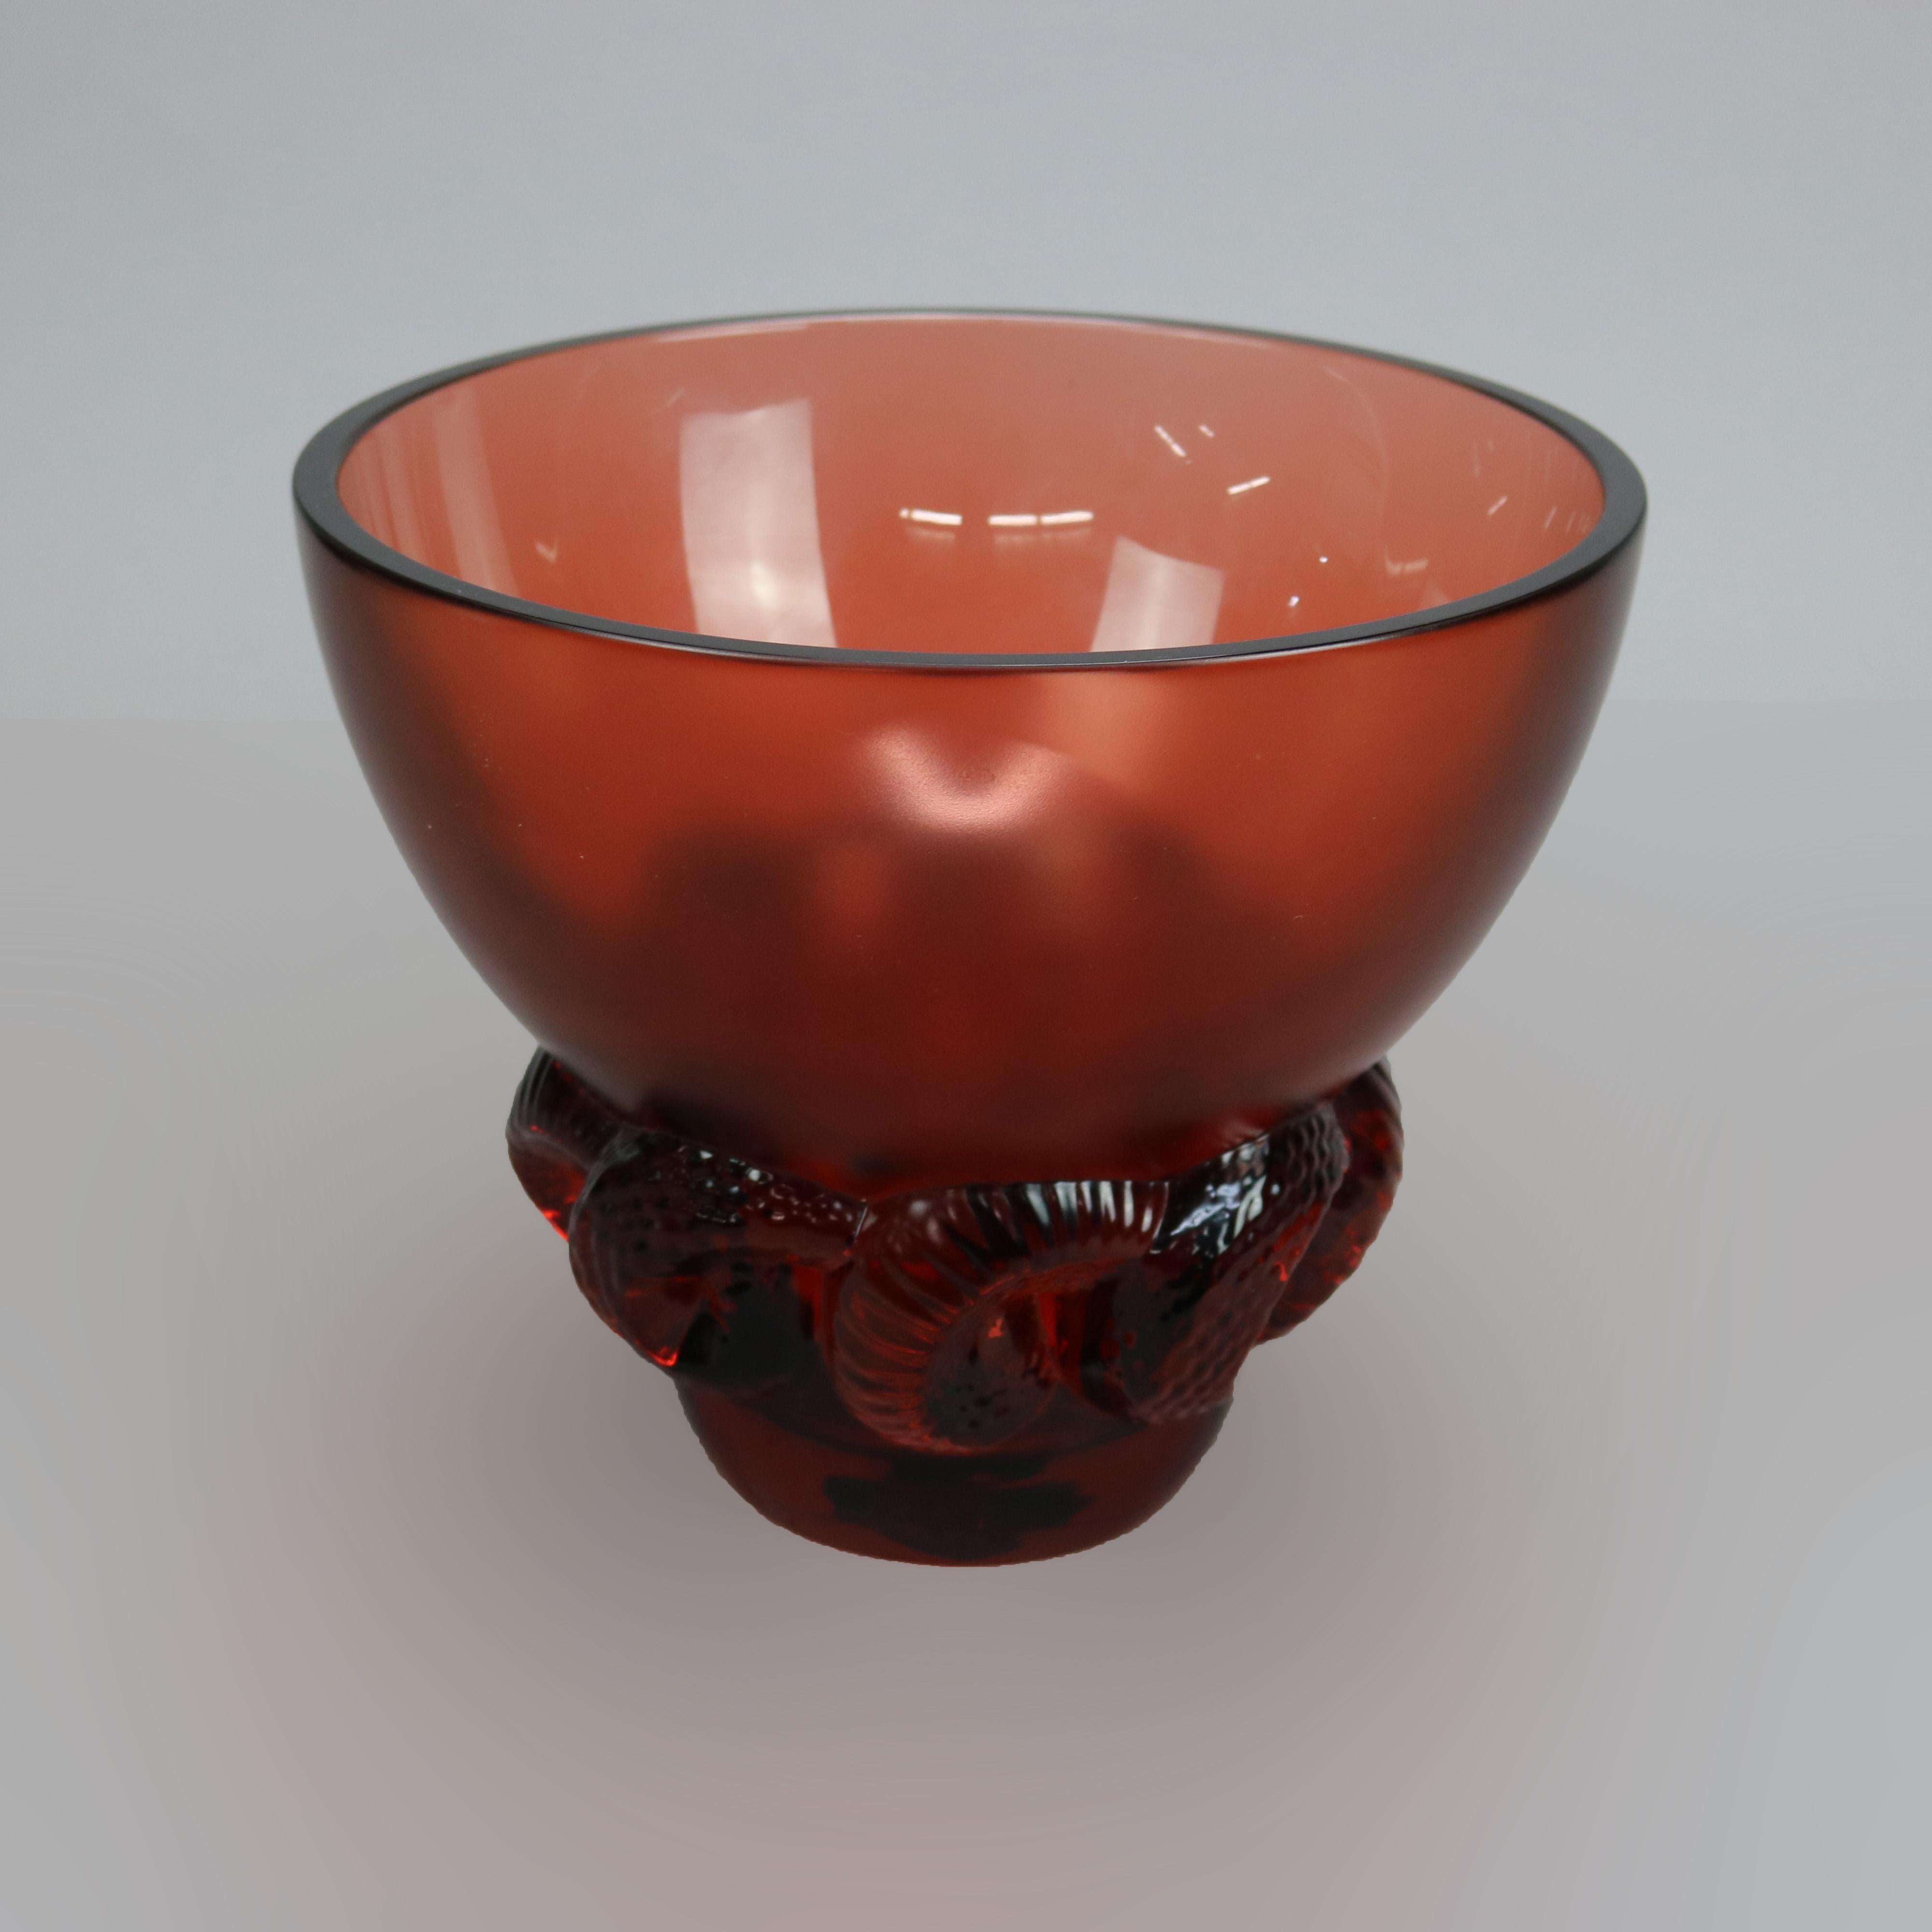 A French Art Nouveau center bowl by Lalique offers art glass construction with base having stylized rams horn elements, signed on base as photographed, 20th century

Measures - 8.25''H x 9.75''W x 9.75''D.